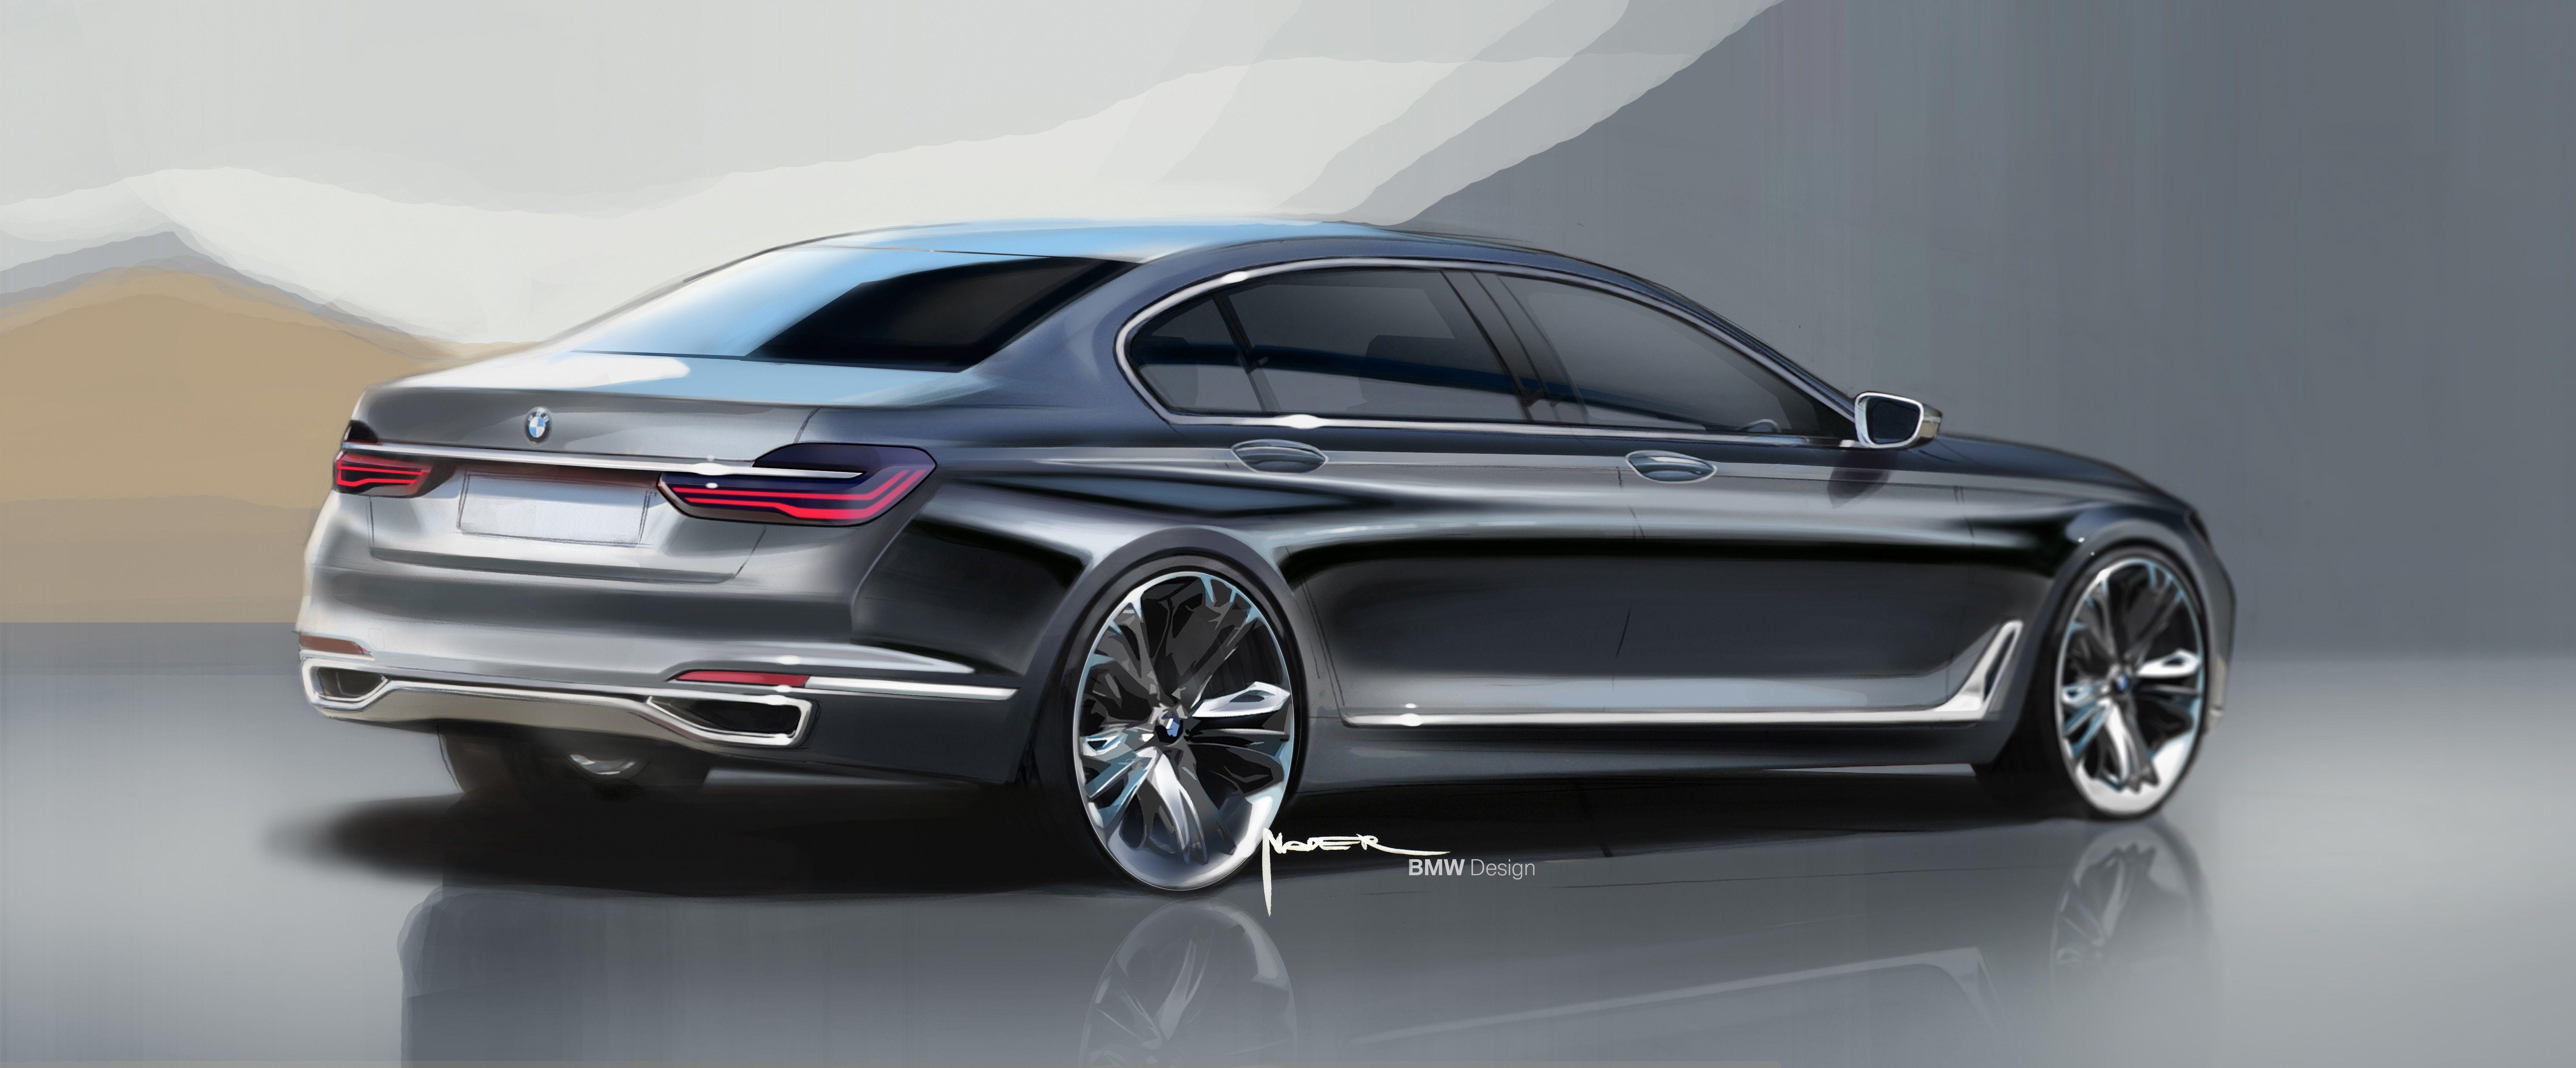 BMW 7 Series Wallpaper and Videos Want to Pull You Into a